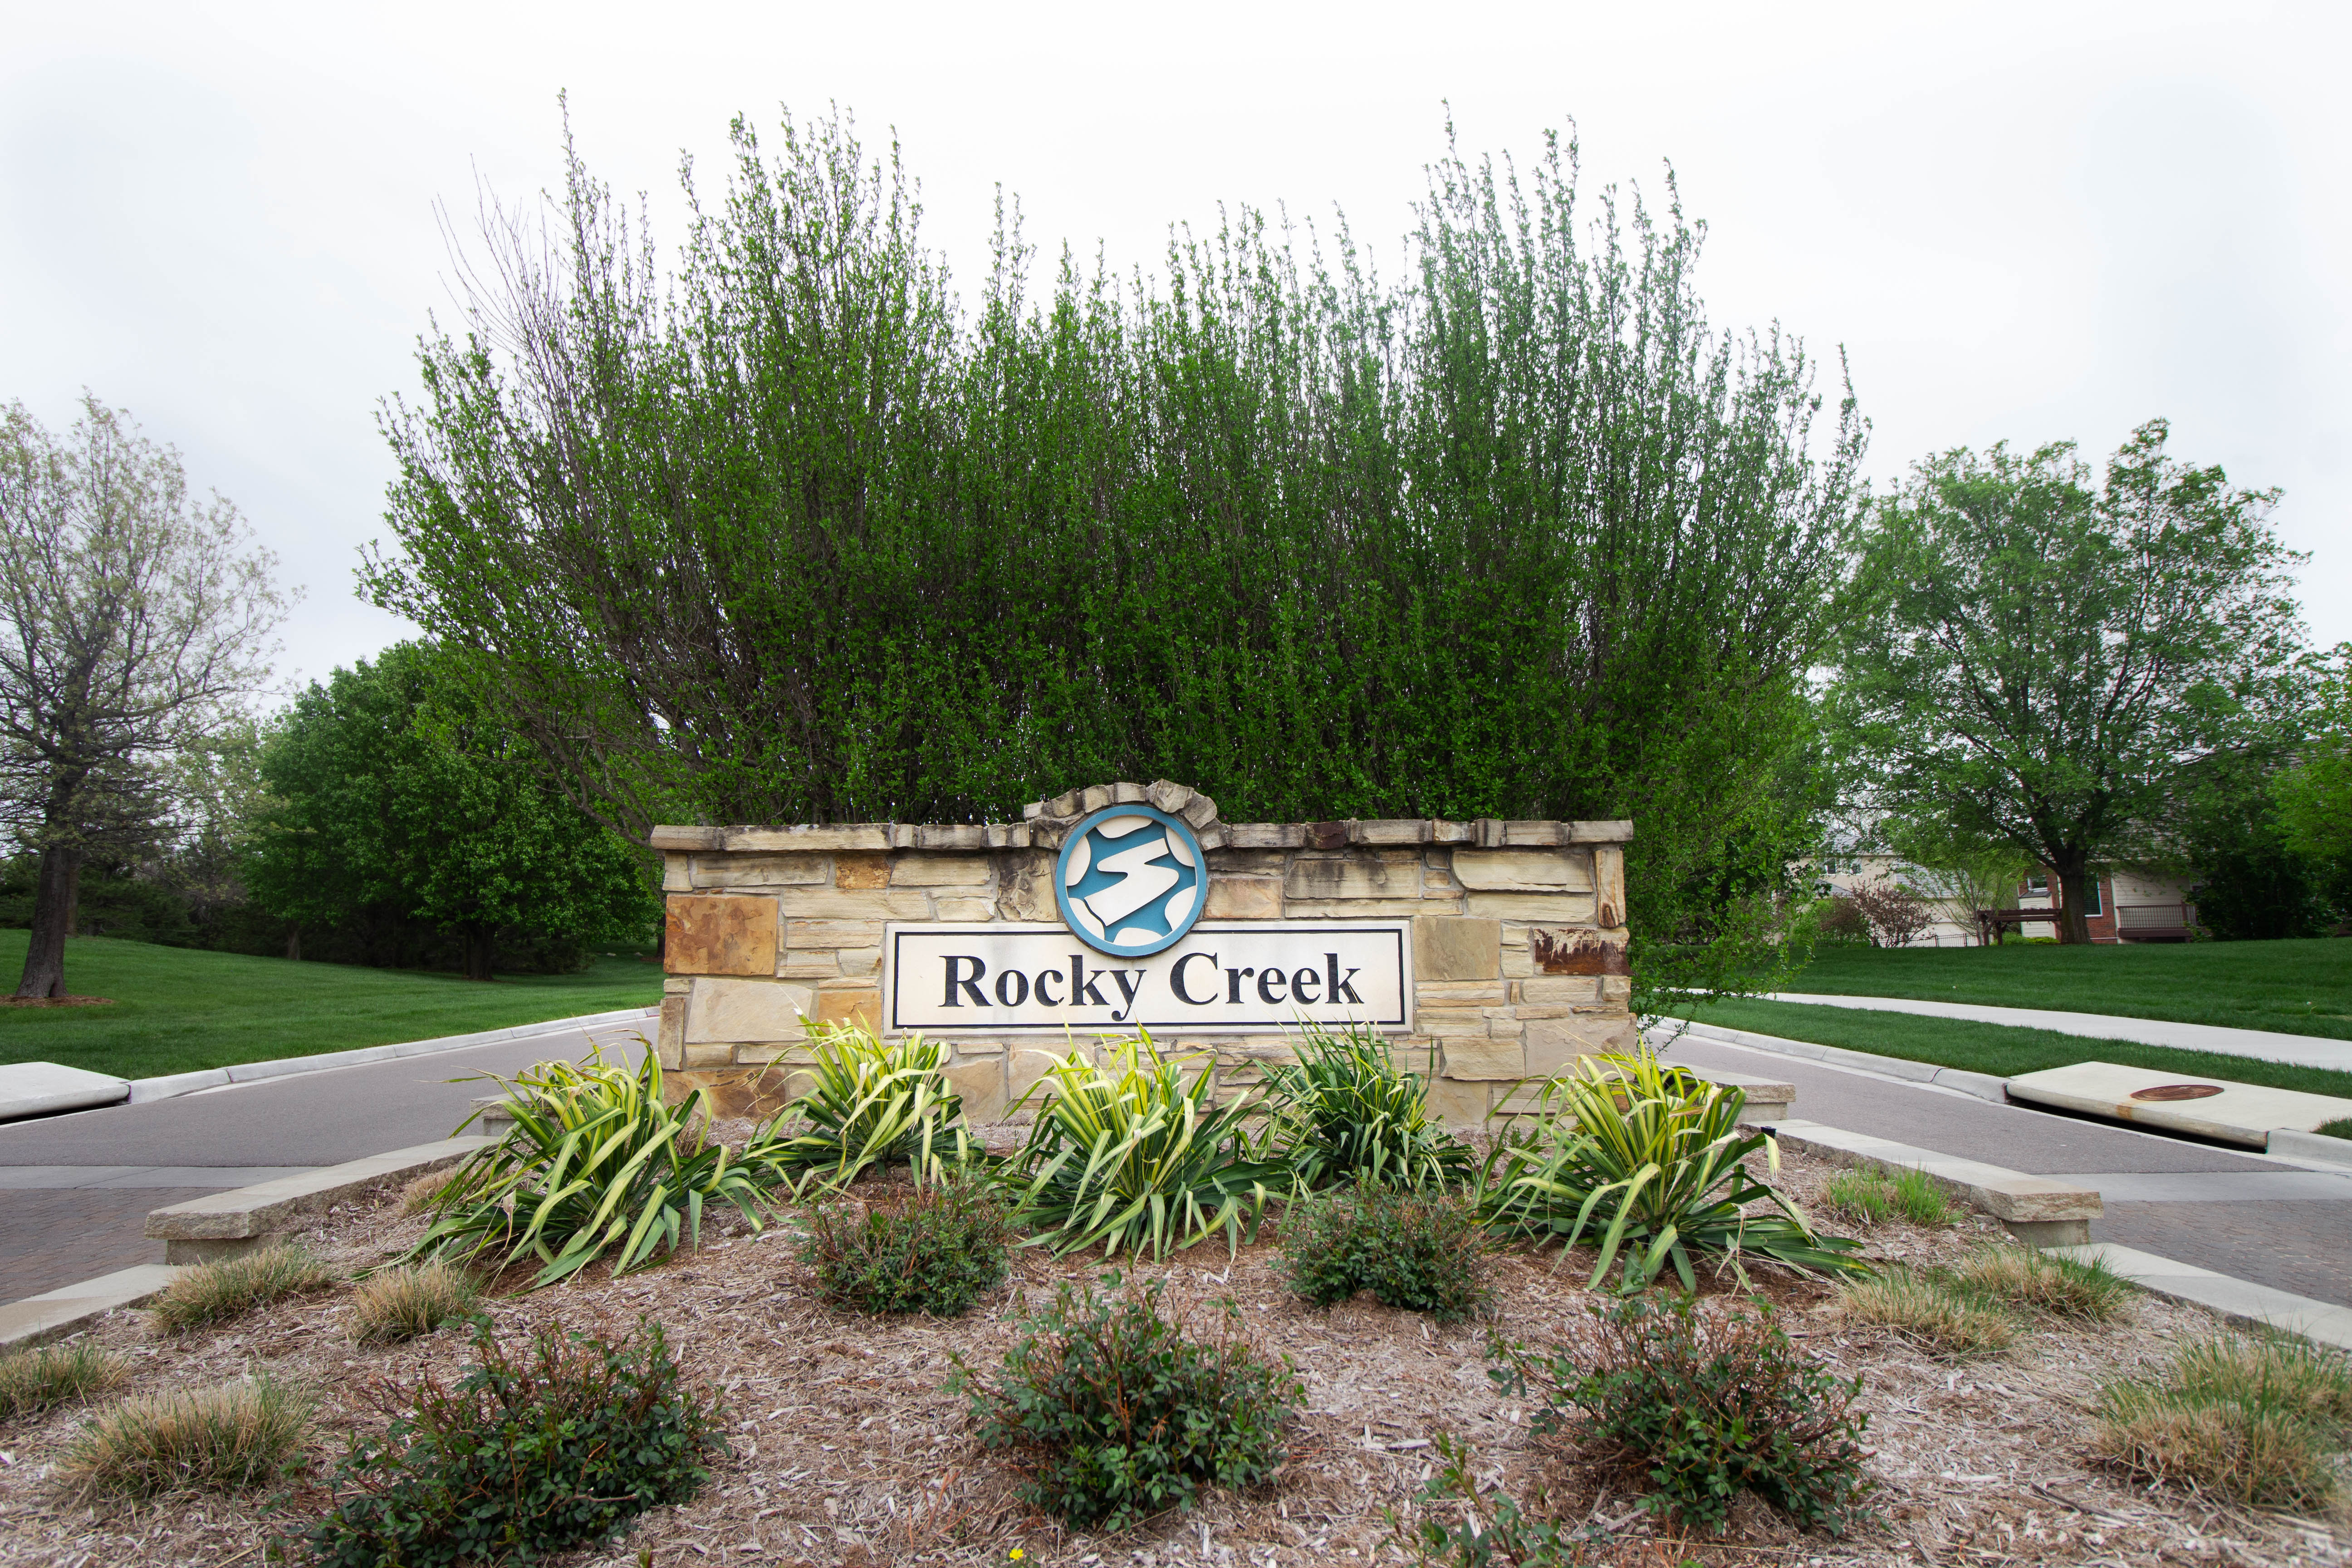 Sign at the entrance of the Rocky Creek subdivision